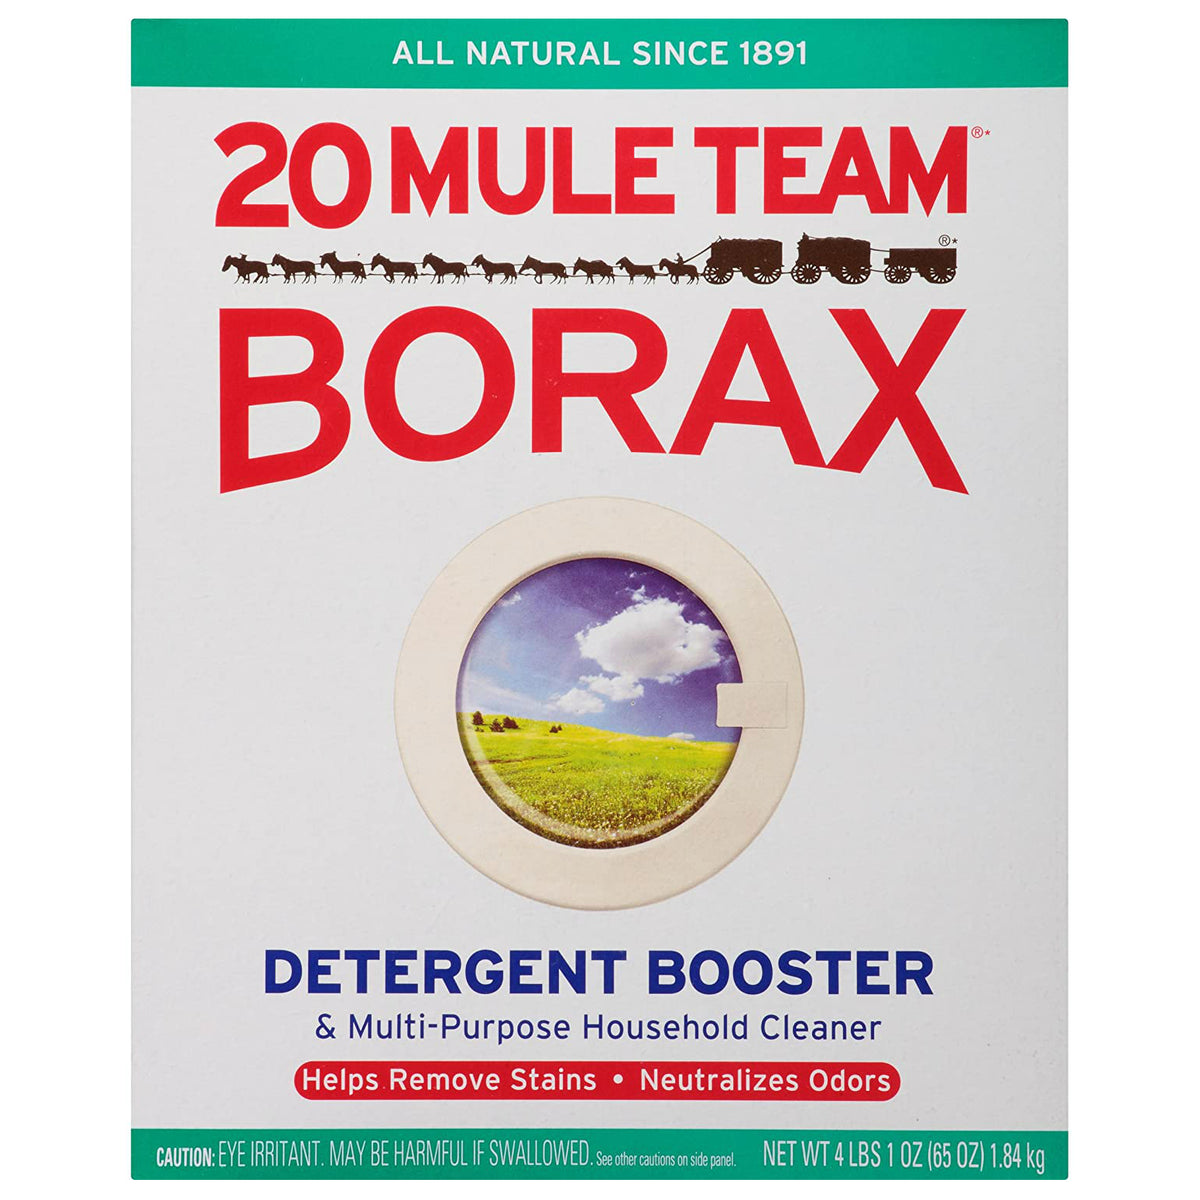 20 Mule Team 00201 Borax All Natural Laundry Booster & Household Cleaner, 65 Oz